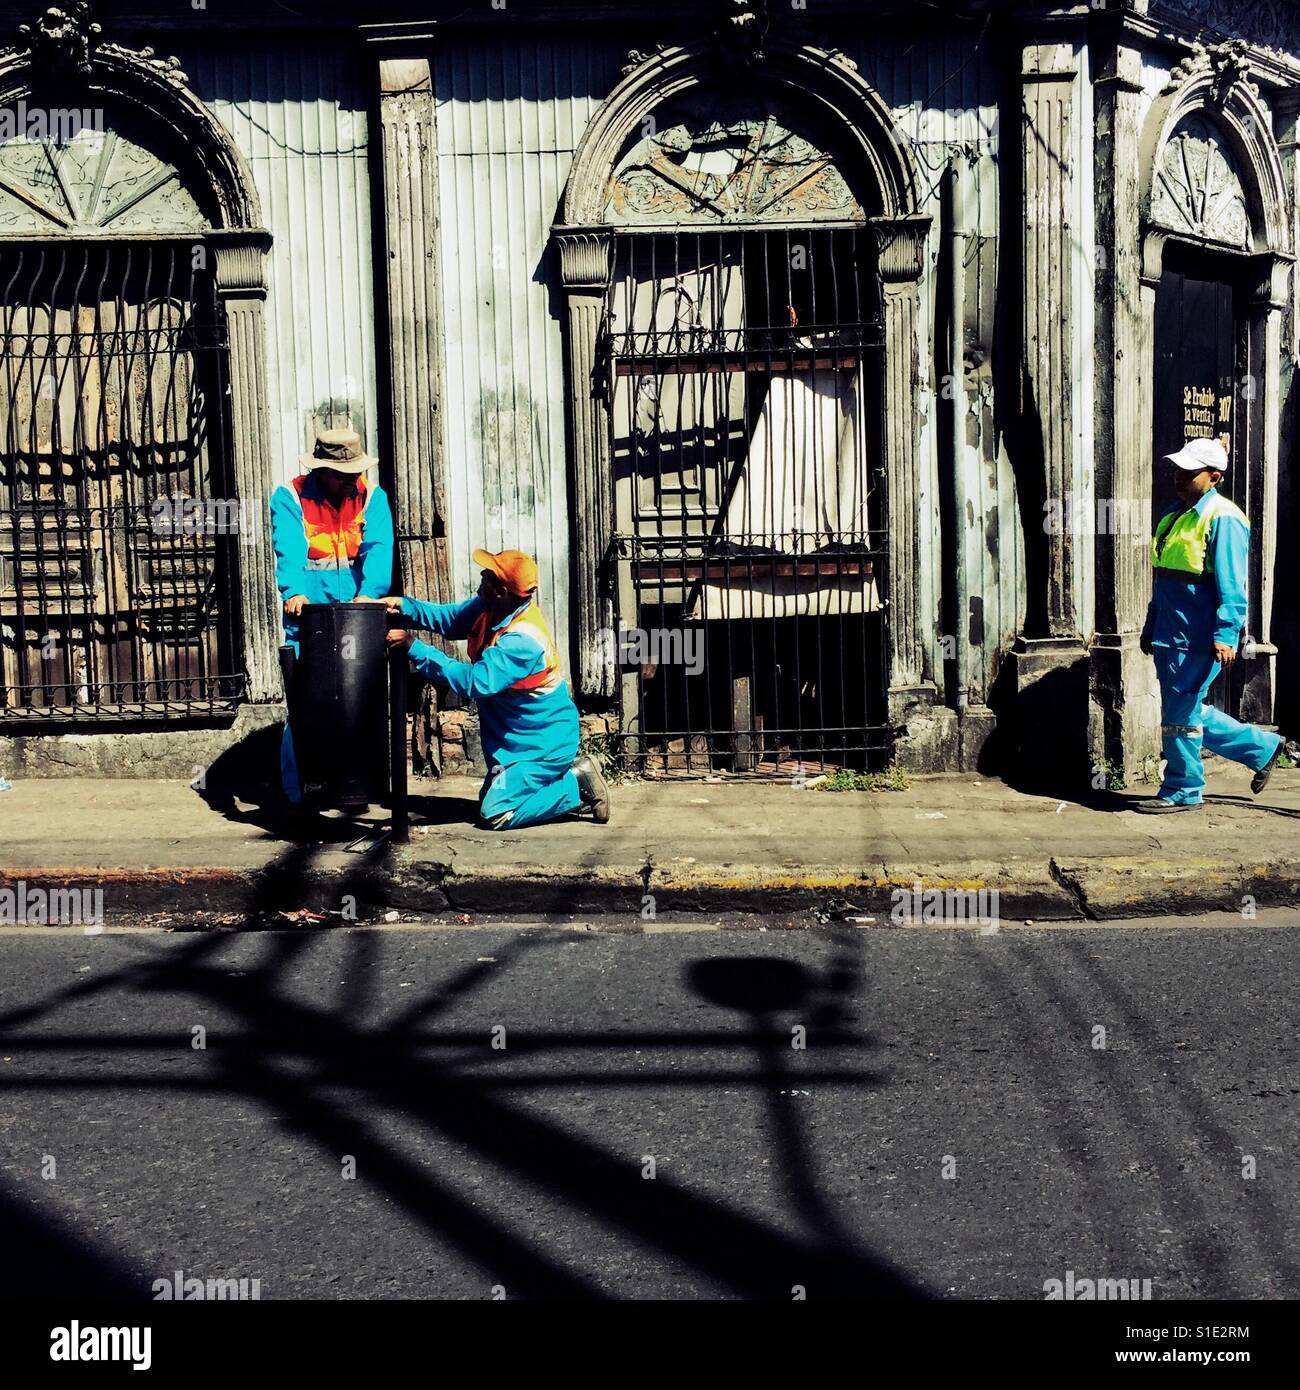 Salvadoran garbage collectors work in front of a ruined house, designed by using bold Spanish colonial architecture elements, built in the center of San Salvador, El Salvador, 10 November 2016. Stock Photo